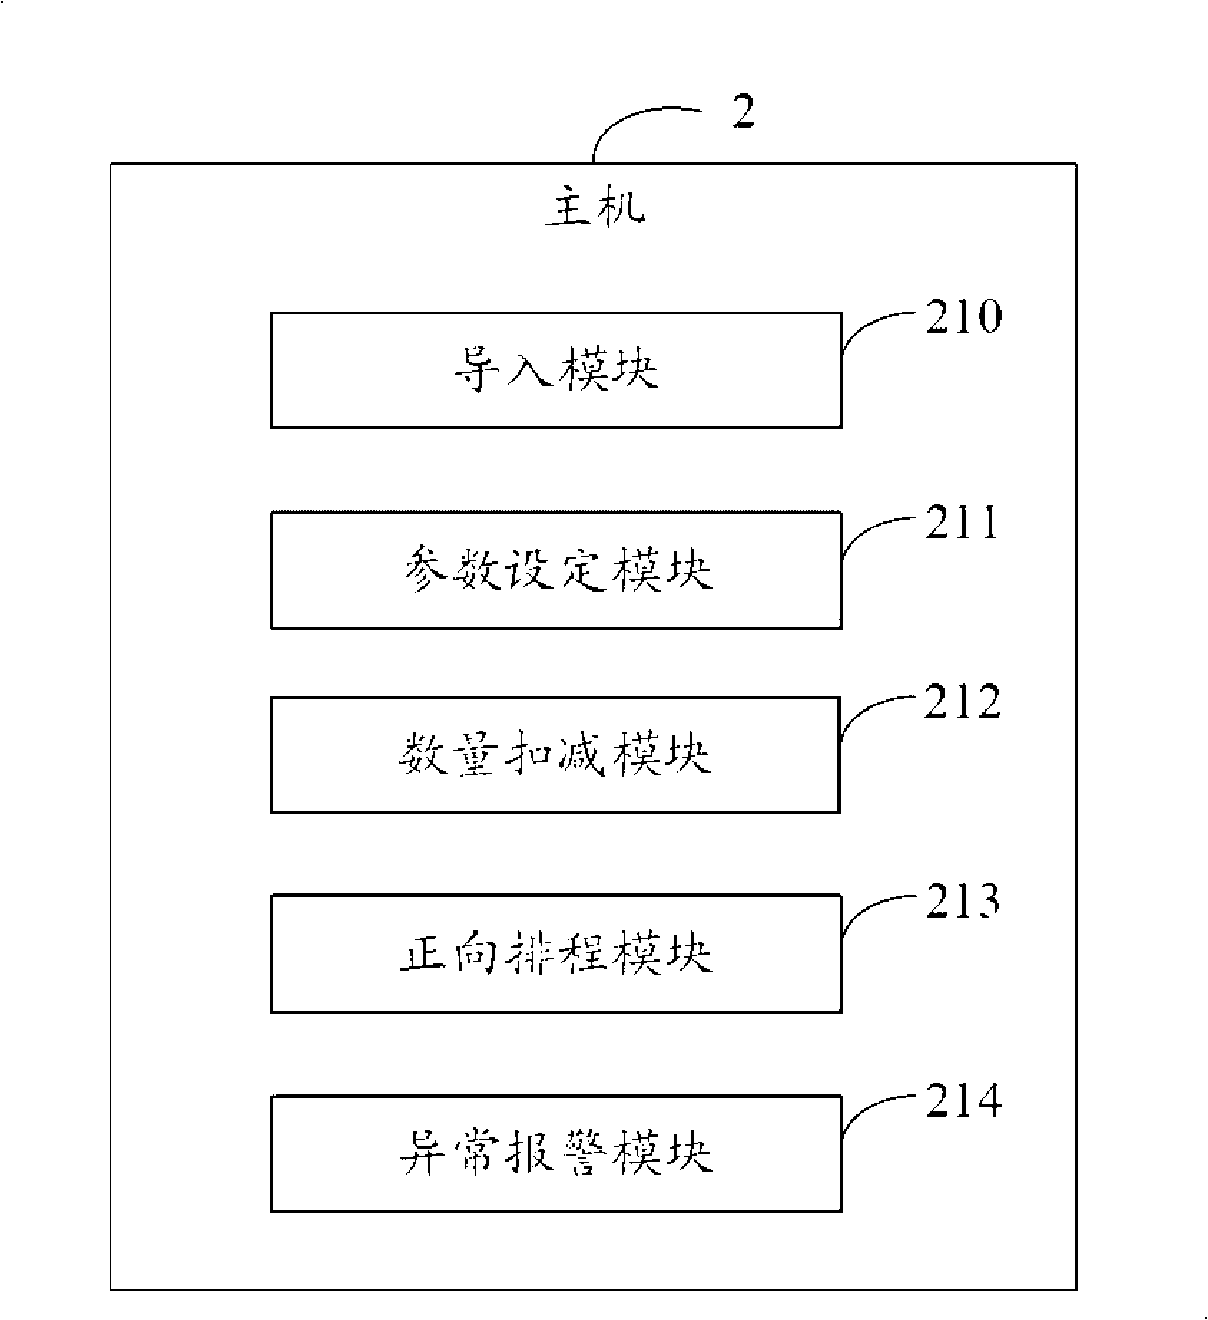 Production schedule forward scheduling system and method